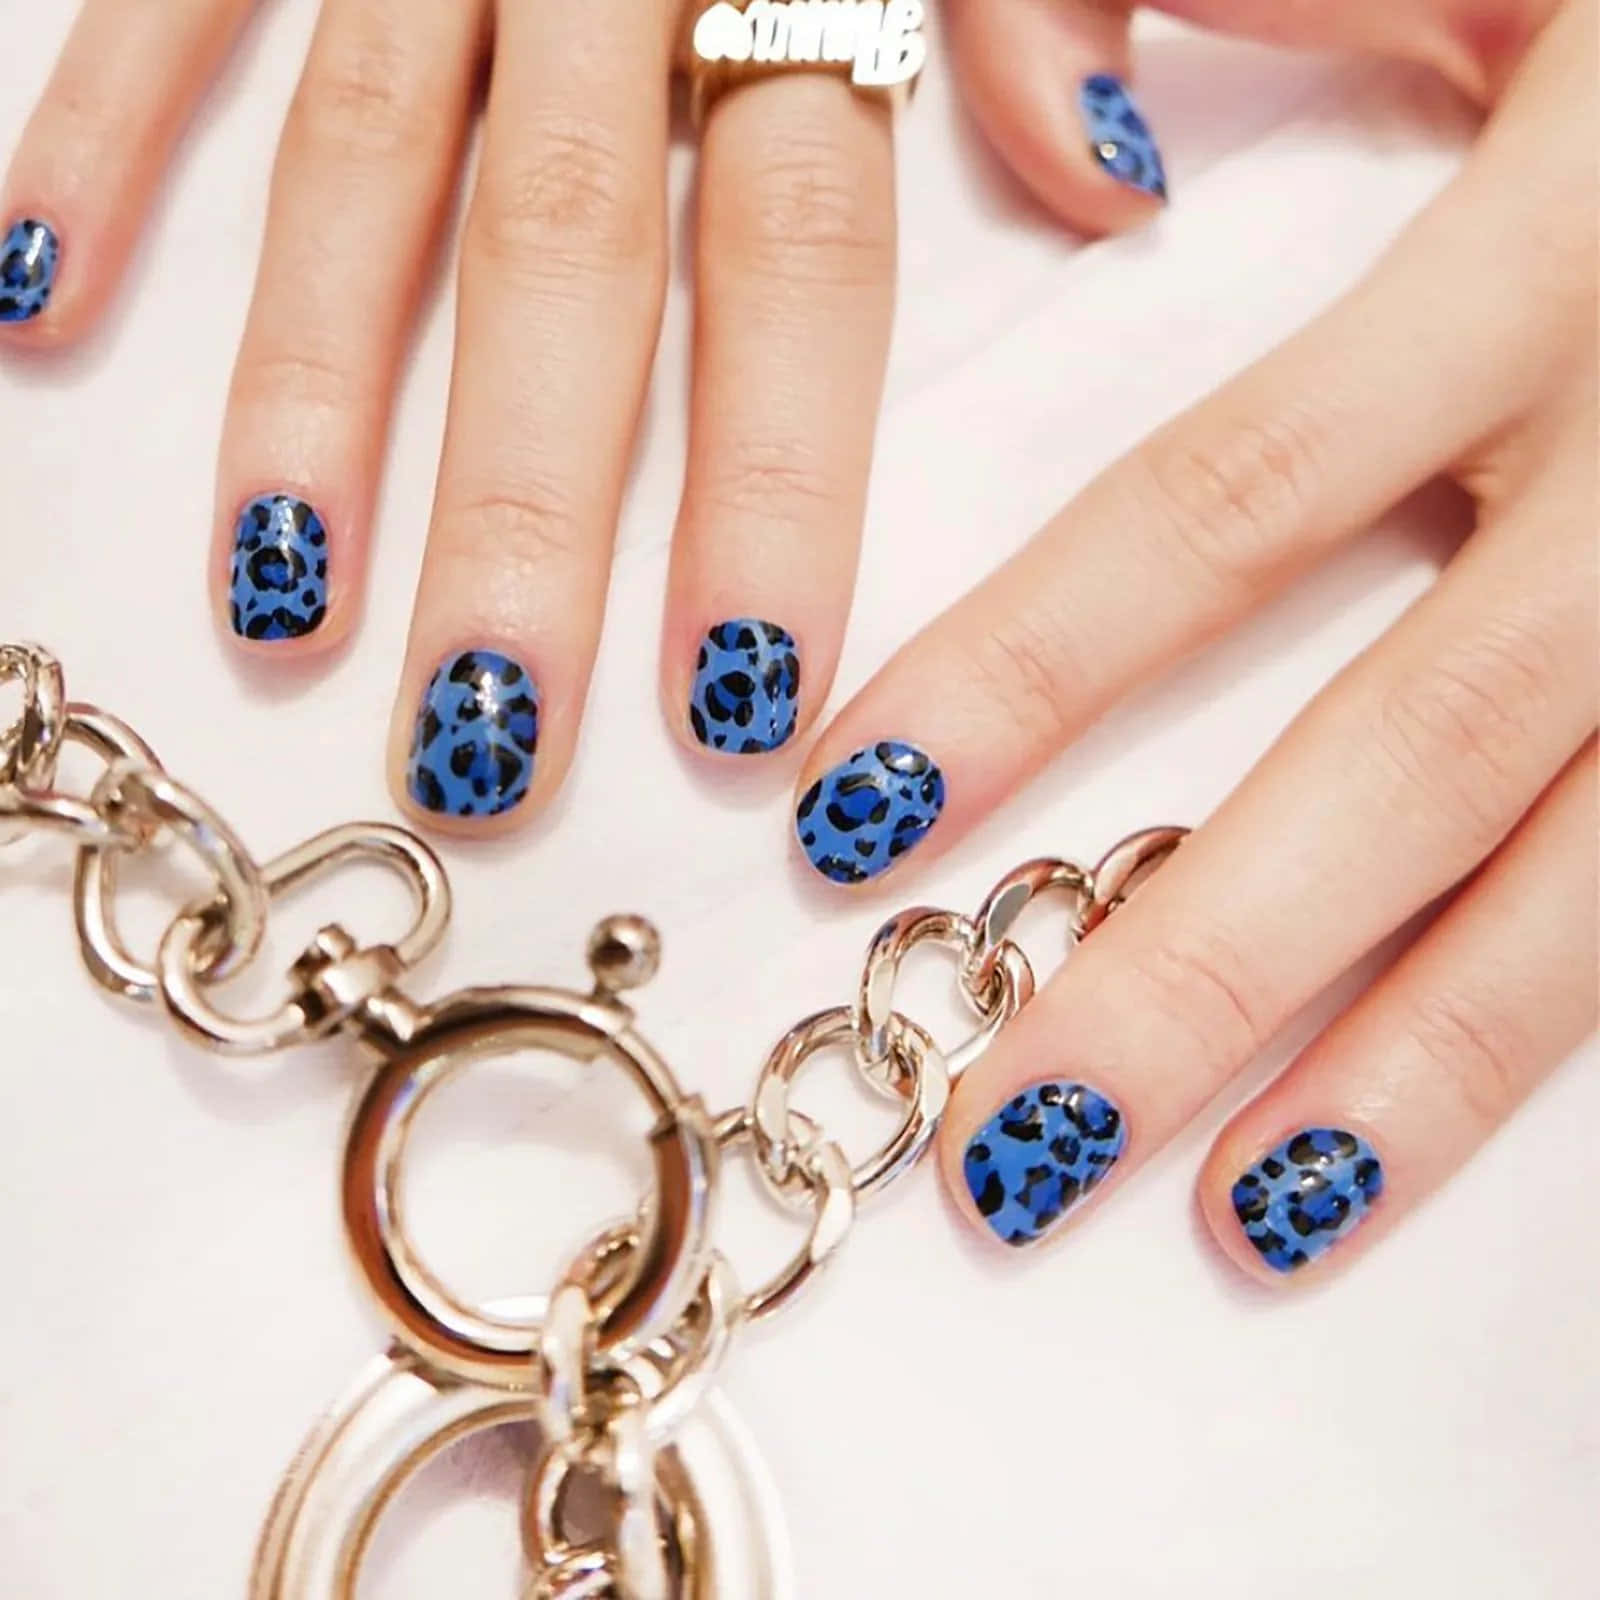 Blue Nails Pictures